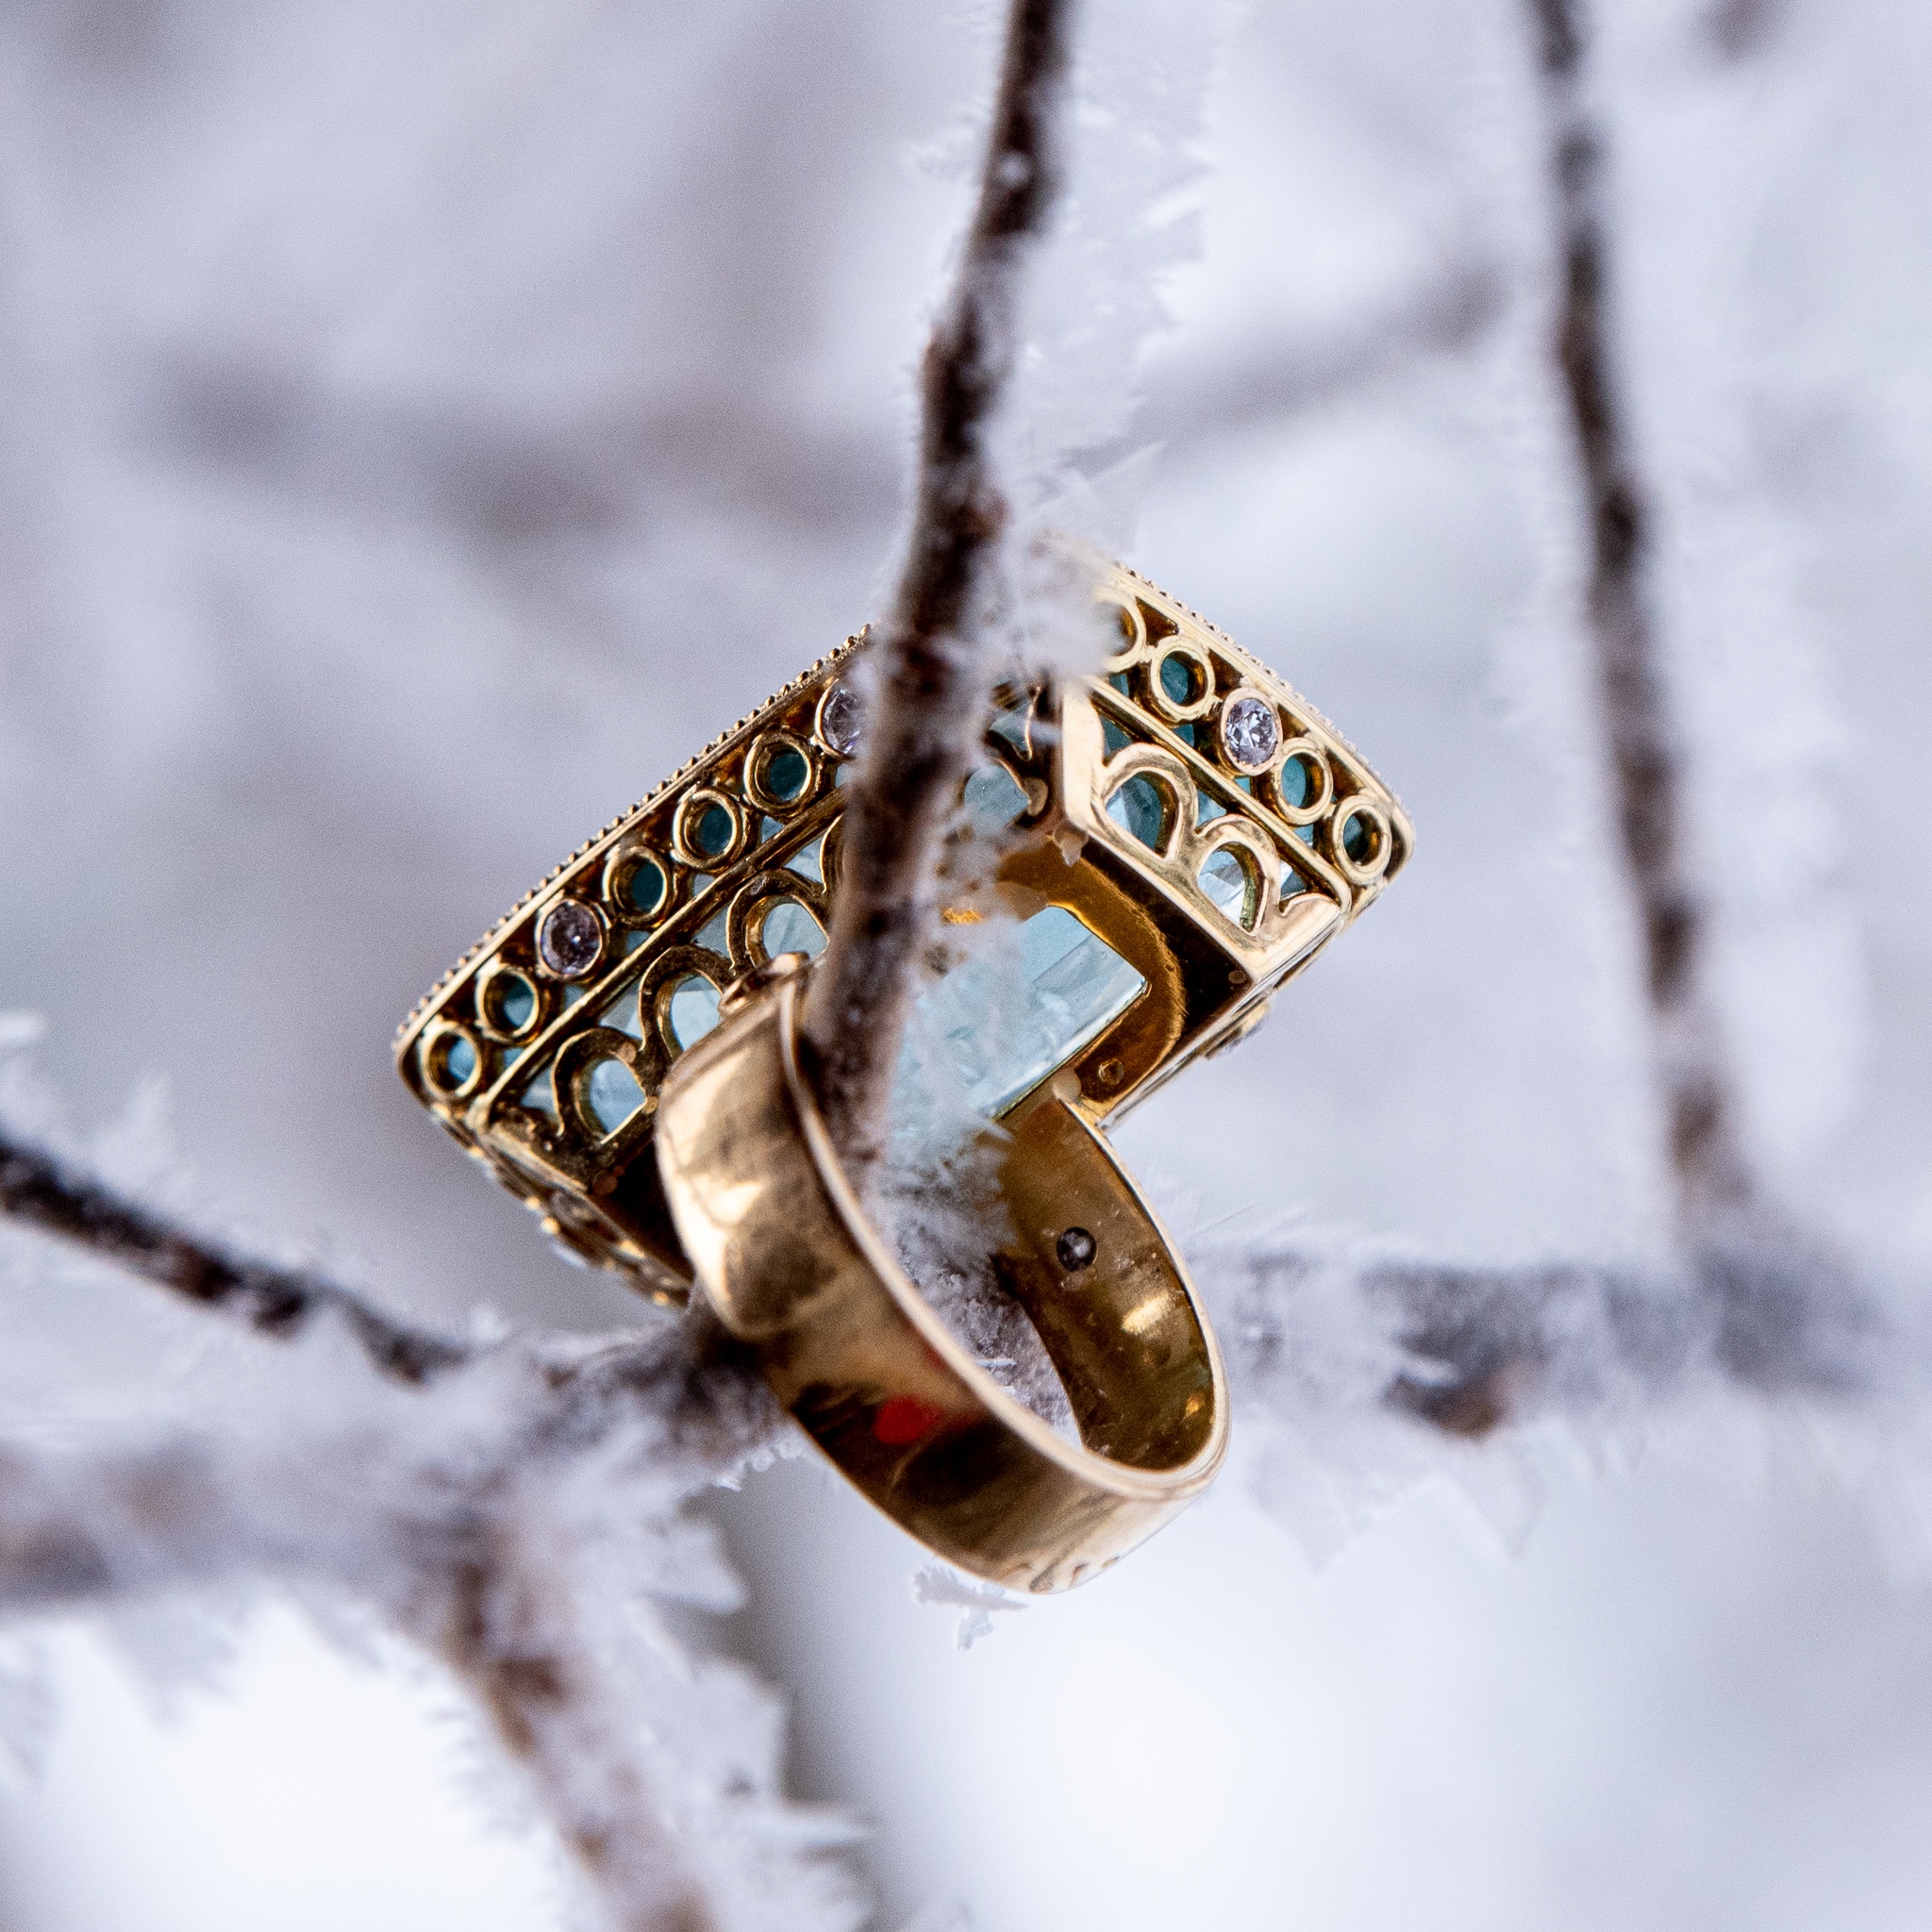 detail view of 35 carat aquamarine ring setting showing the 20K yellow gold basket and ring shank